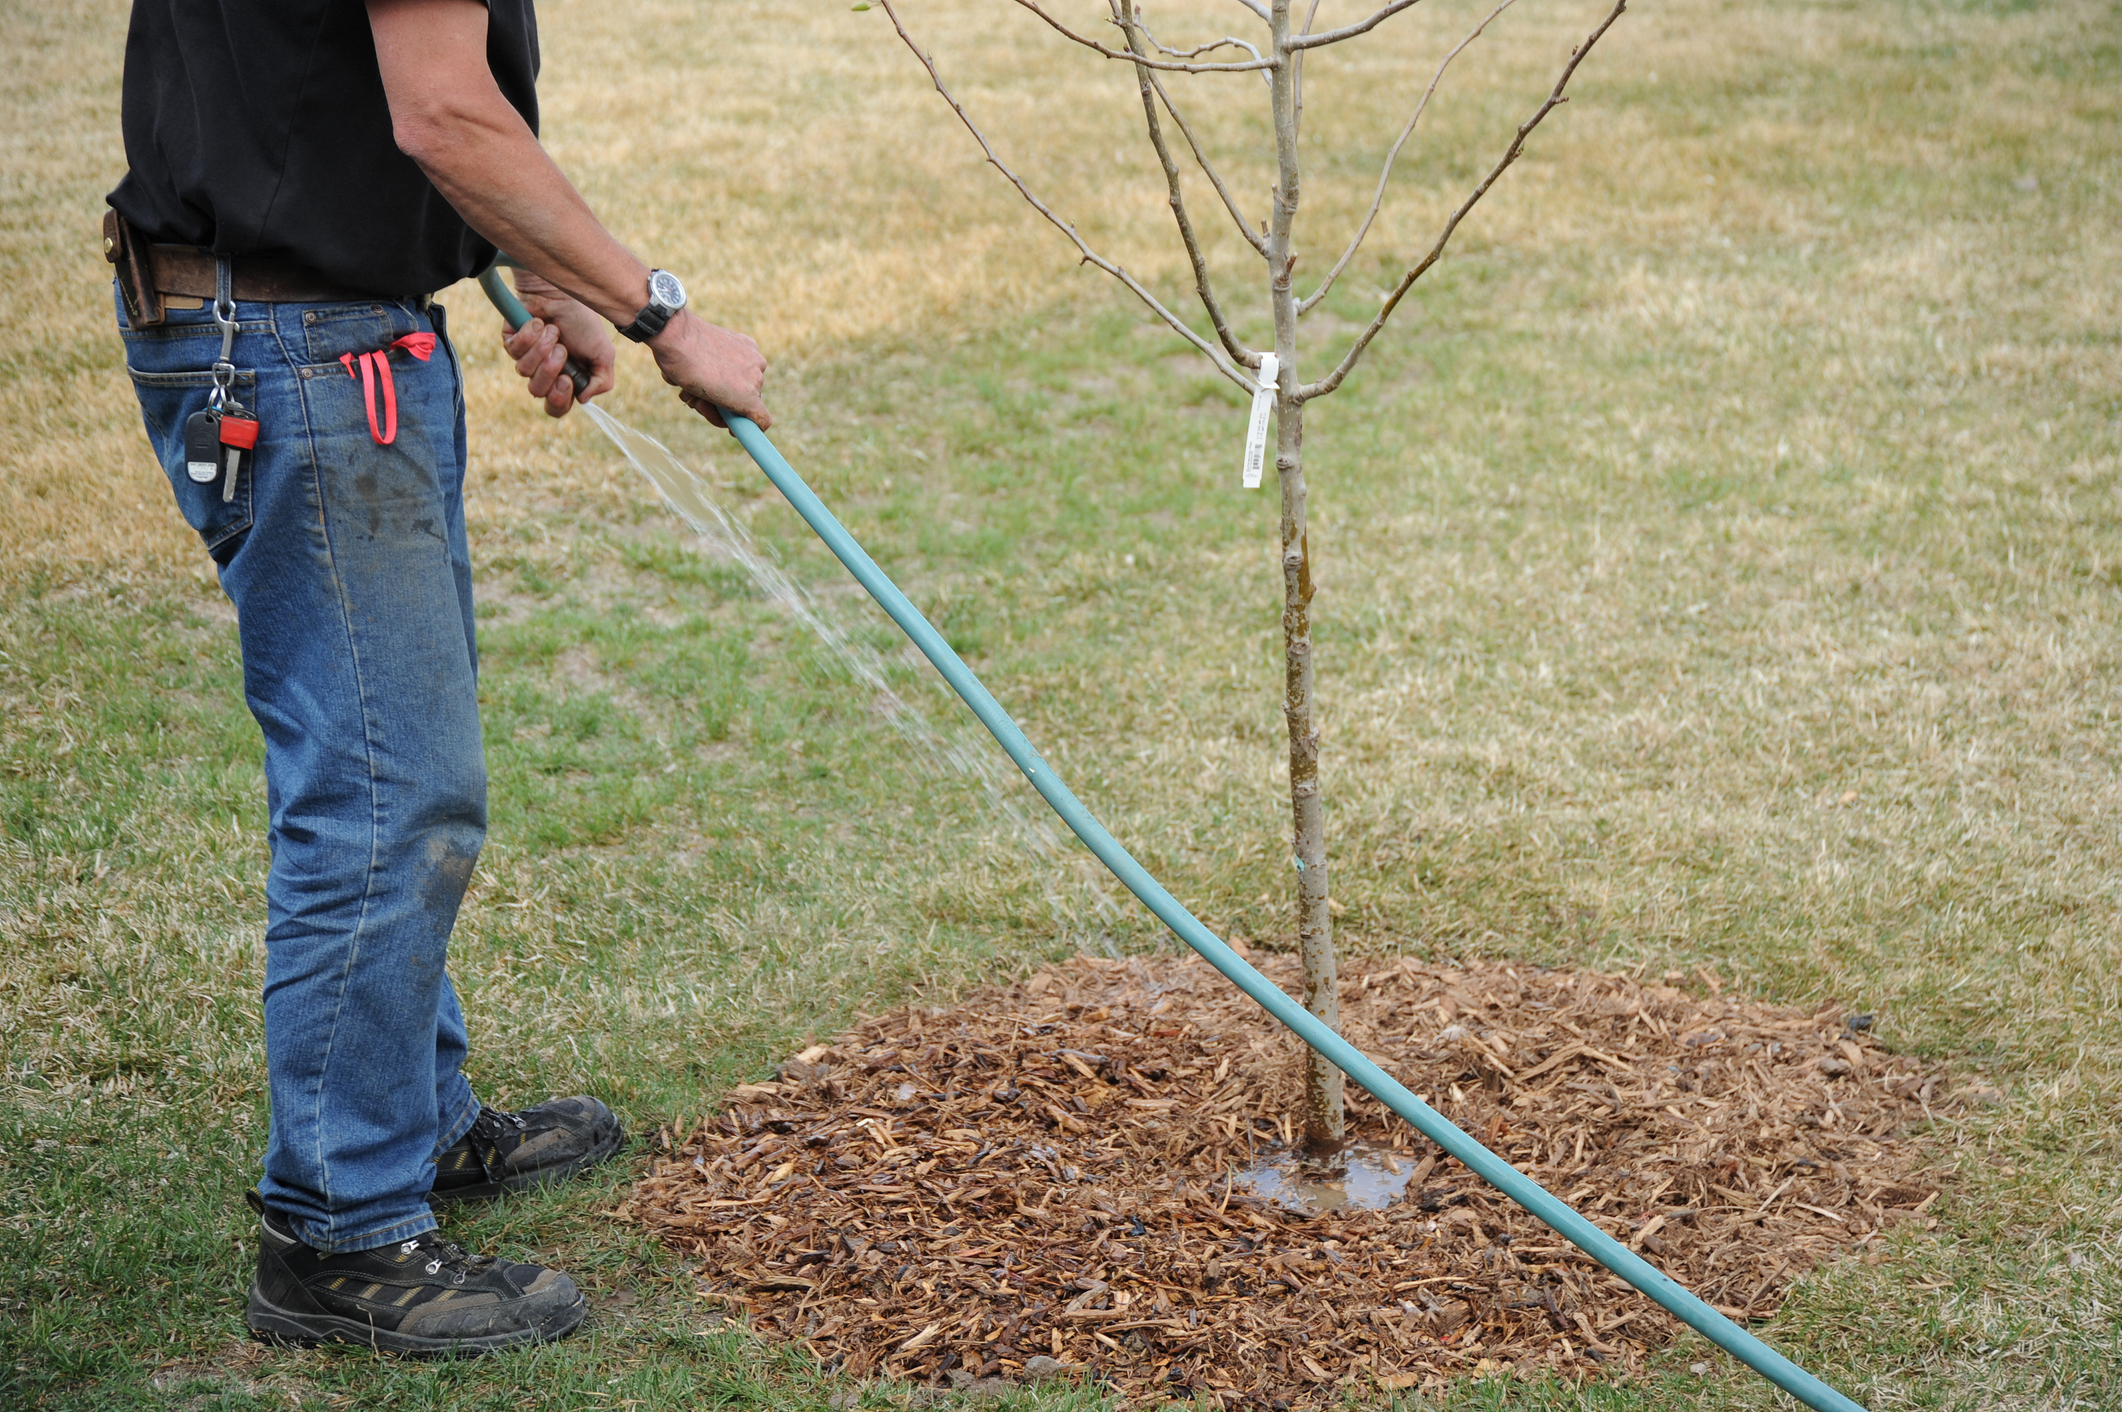 Professional gardener watering a tree he just planted. (Photo: iStock - oscarcwilliams)